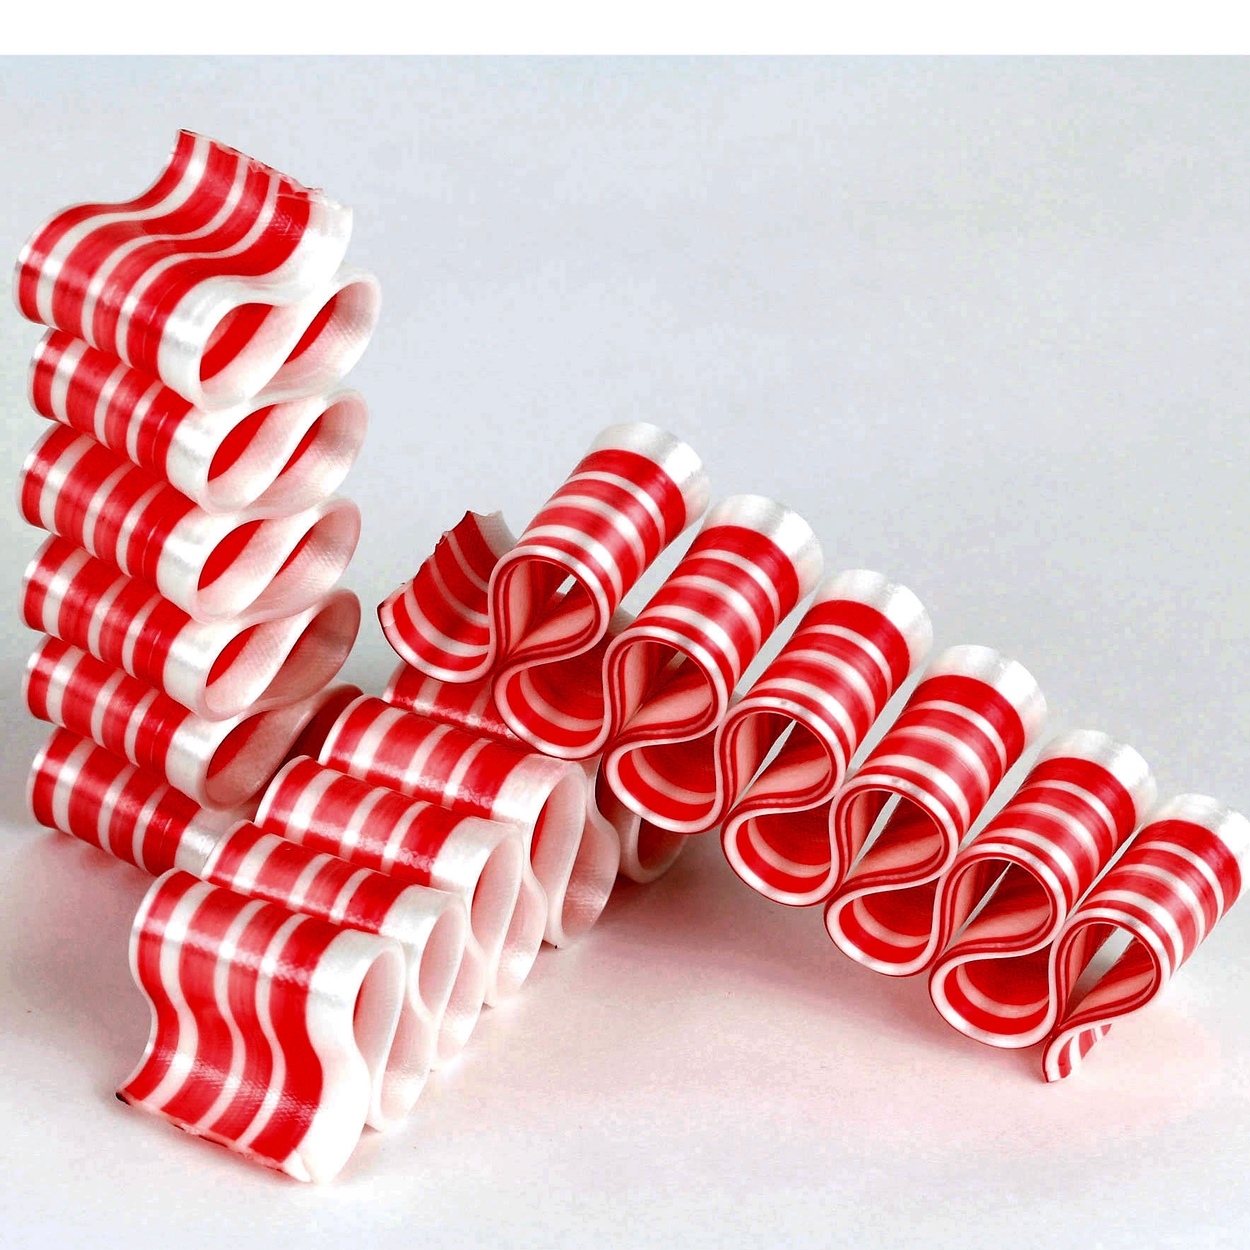 Old Fashioned Red & White Thin Candy Ribbon - 6CT Box • Old Fashioned Candy  Ribbon • Unwrapped Candy • Bulk Candy • Oh! Nuts®